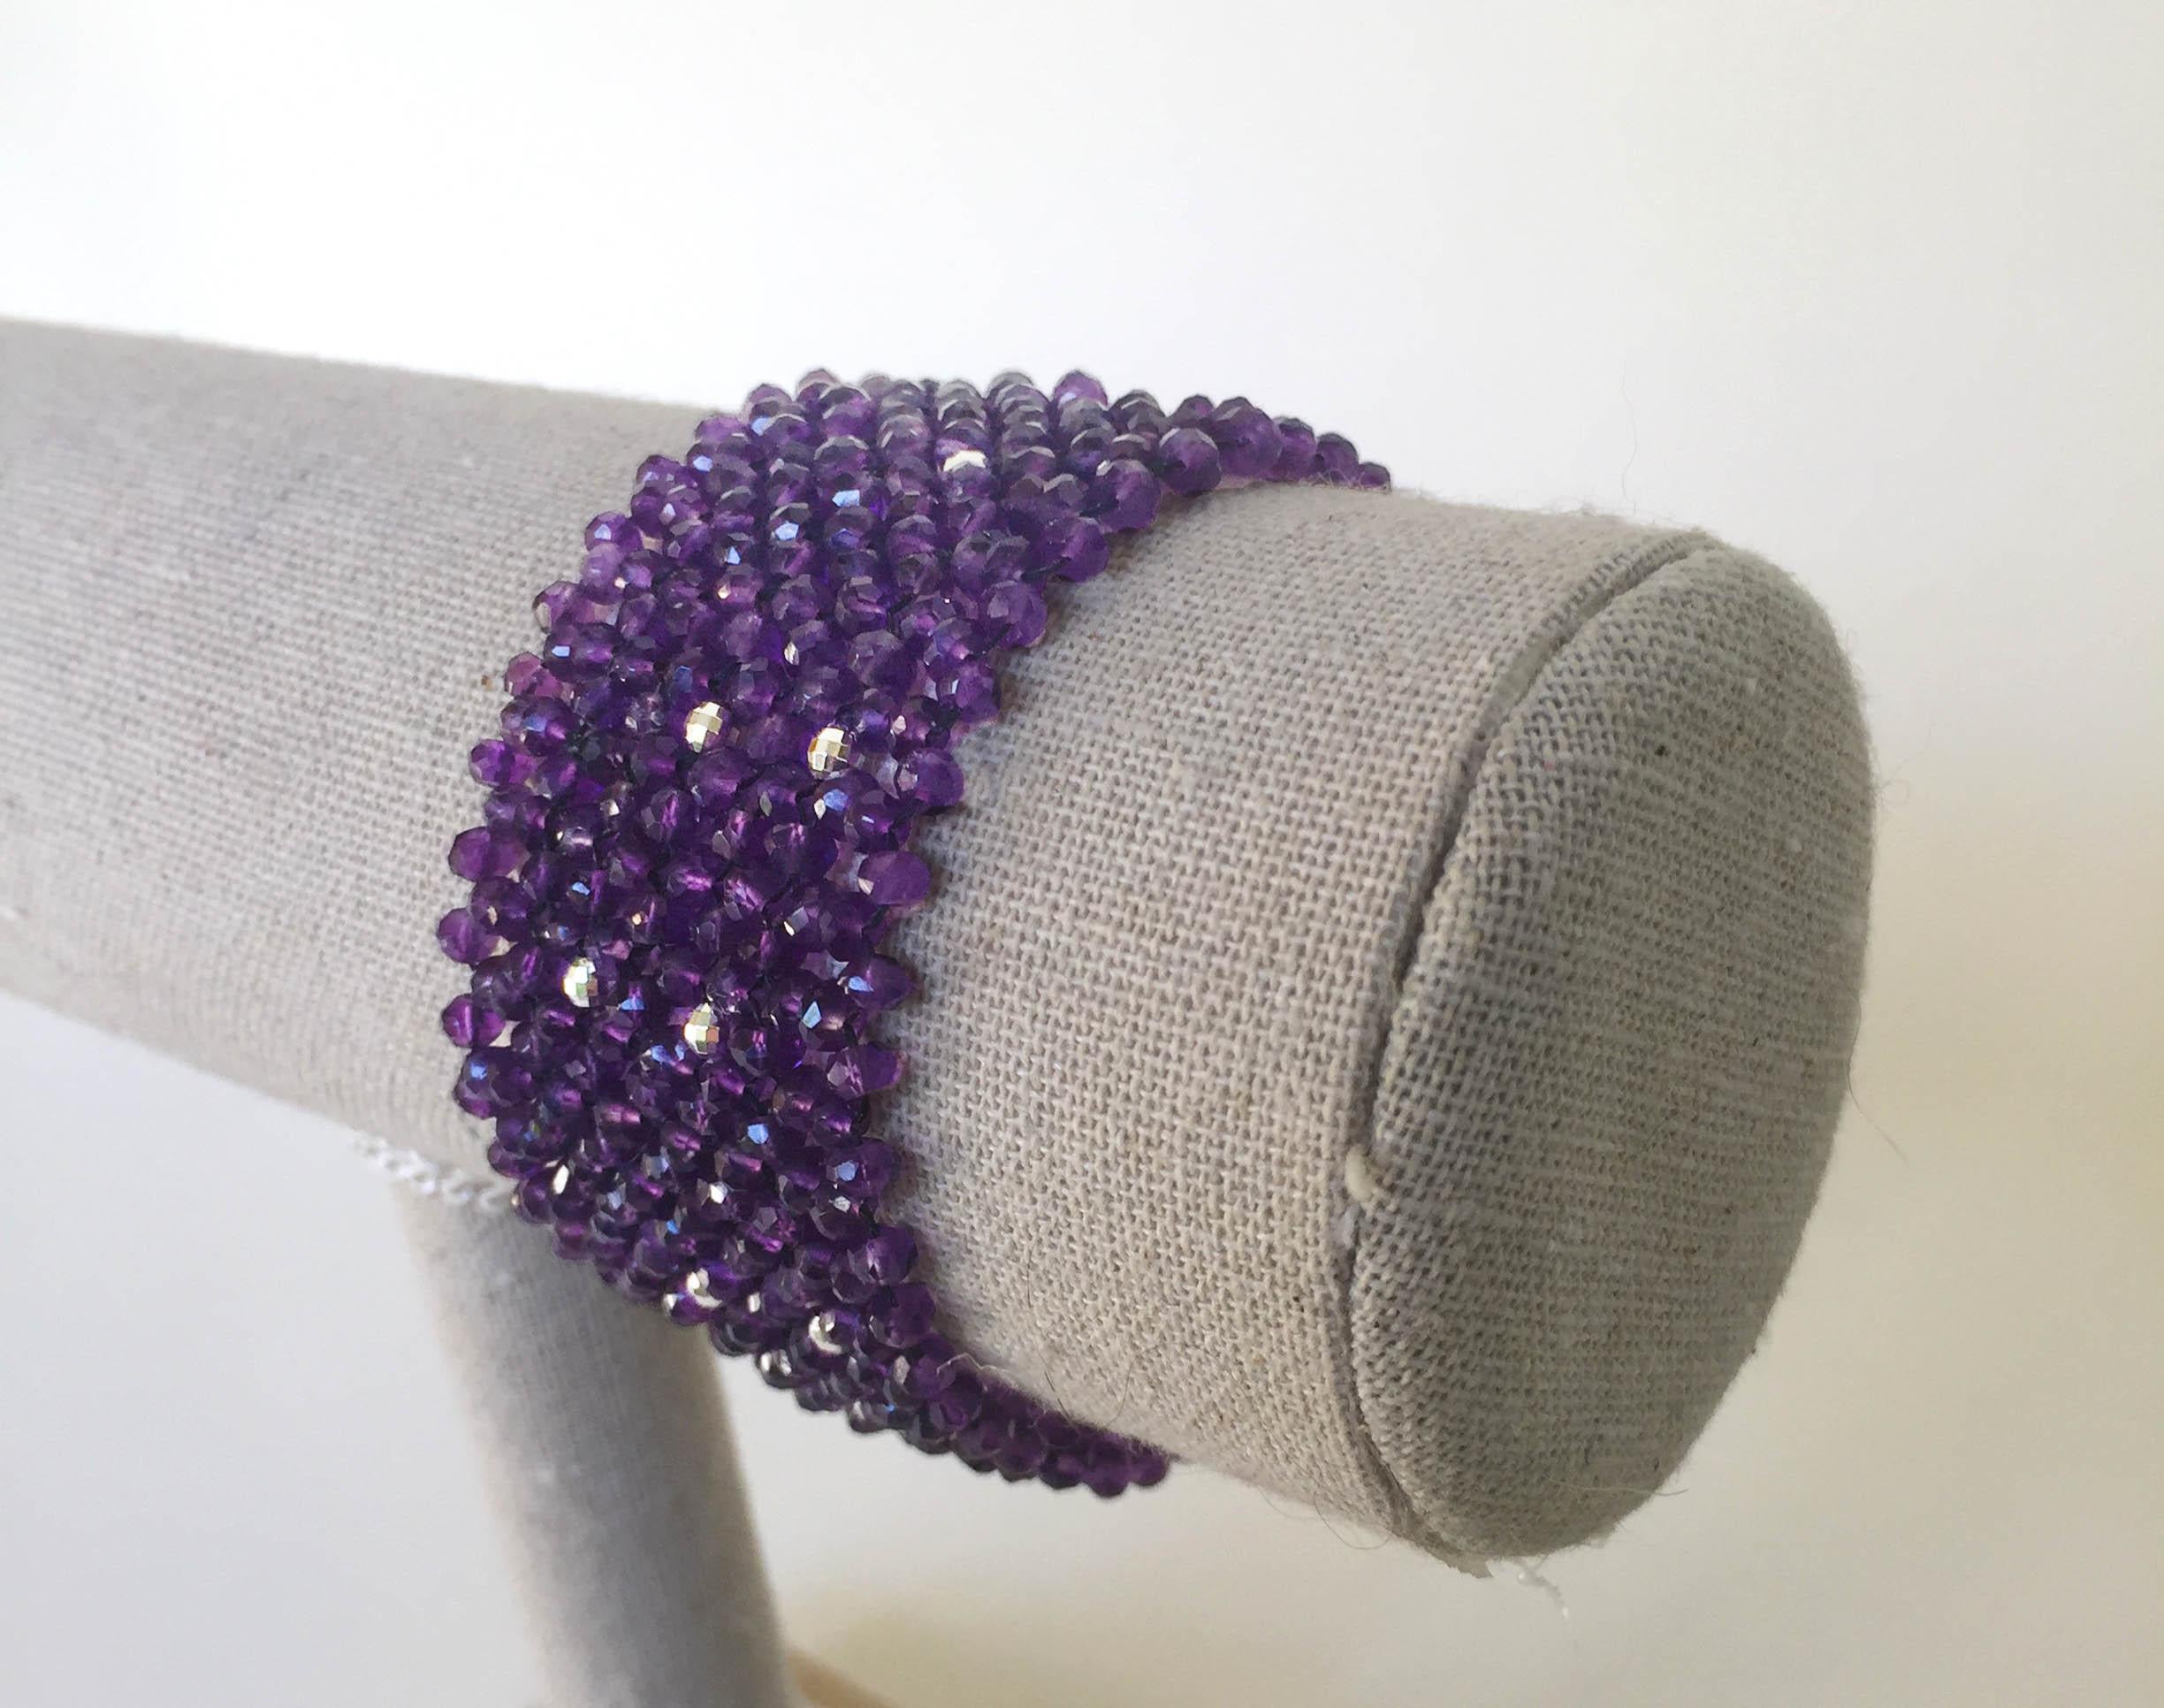 Bead Marina J. Woven Faceted Amethyst beads Cuff Bracelet with Sterling Silver Clasp 